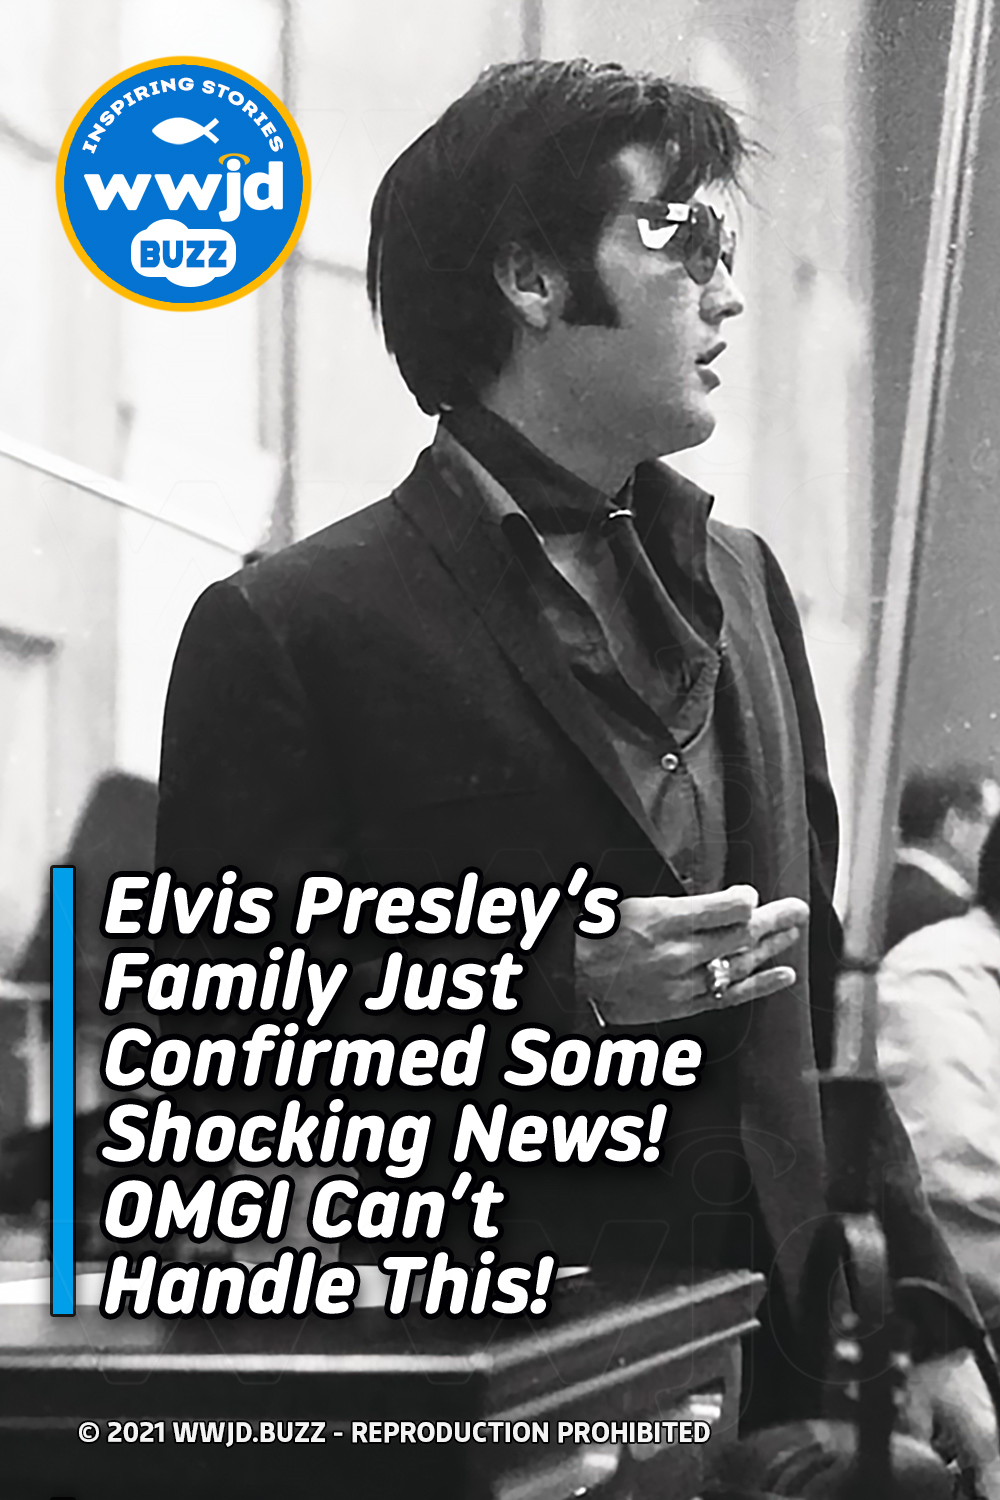 Elvis Presley’s Family Just Confirmed Some Shocking News! OMGI Can’t Handle This!